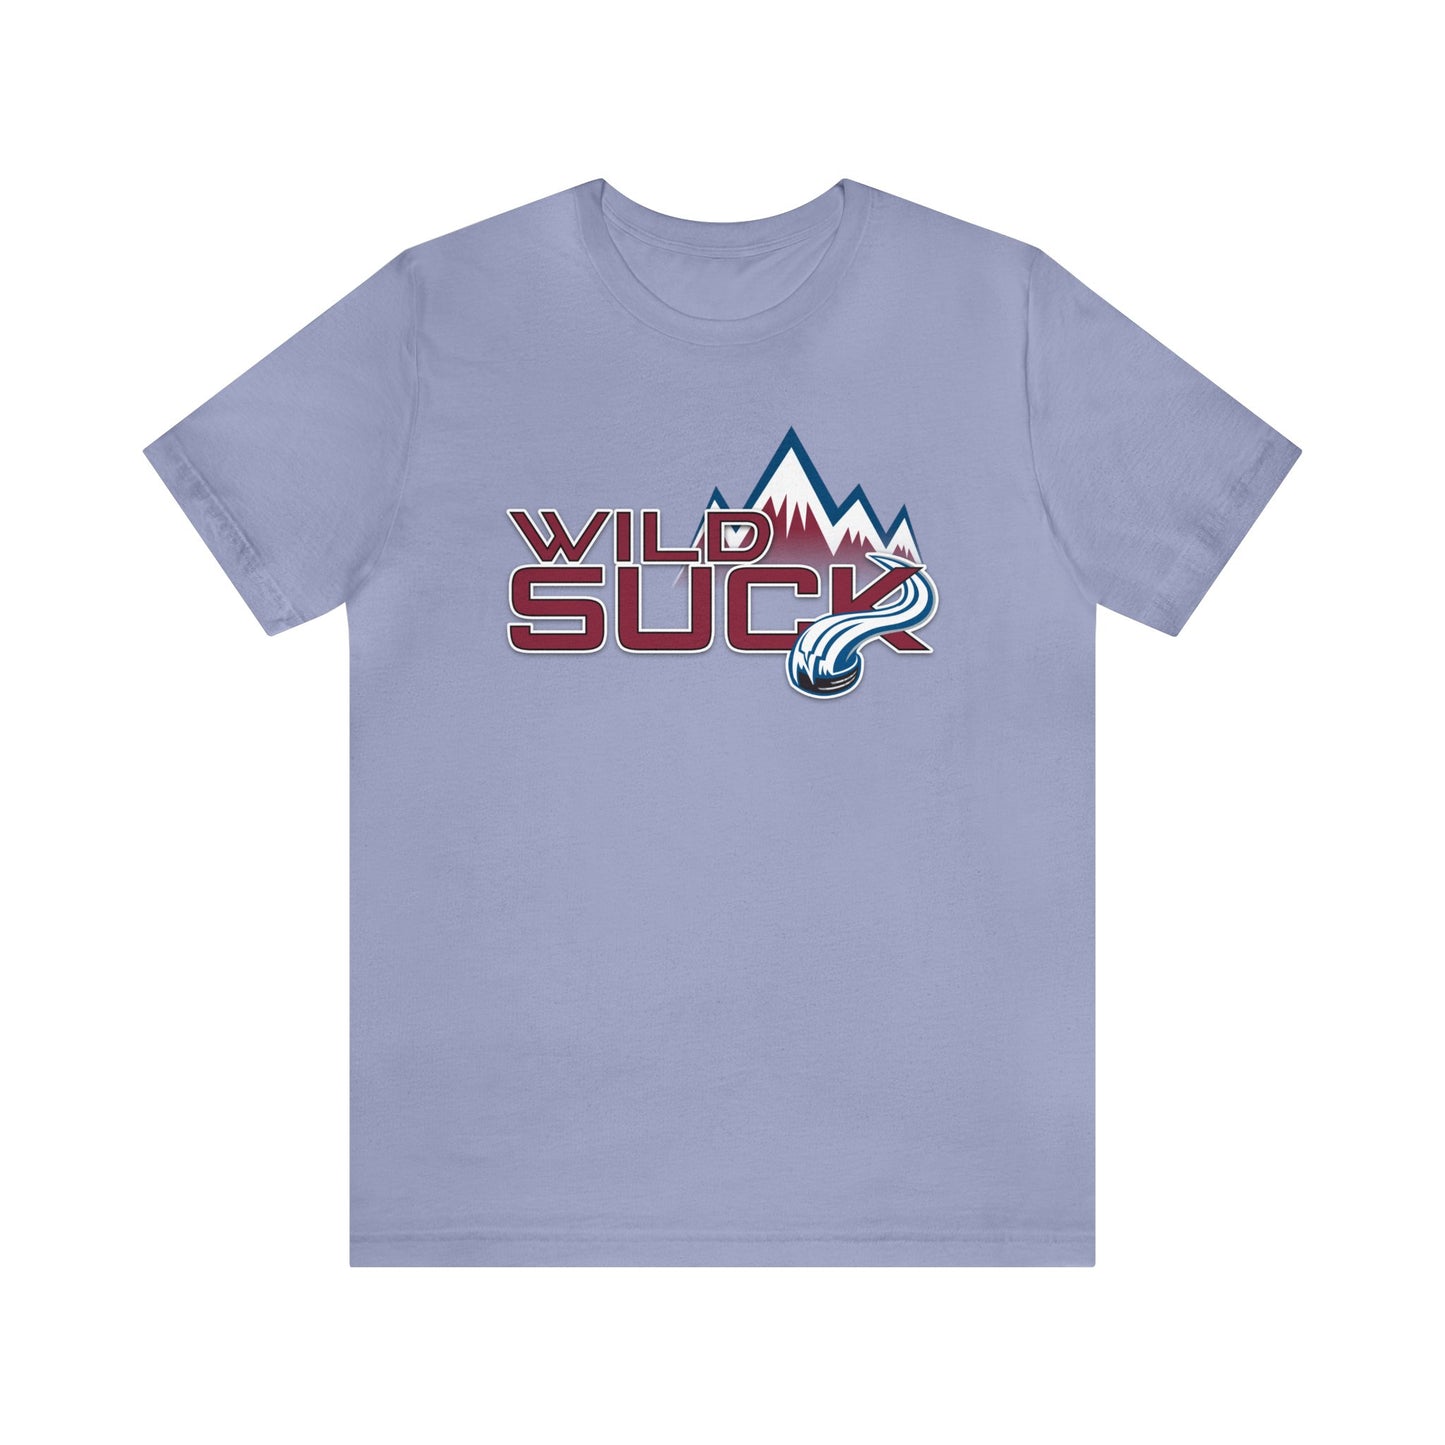 The Wyld Totally Suck (for Colorado fans) - Unisex Jersey Short Sleeve Tee